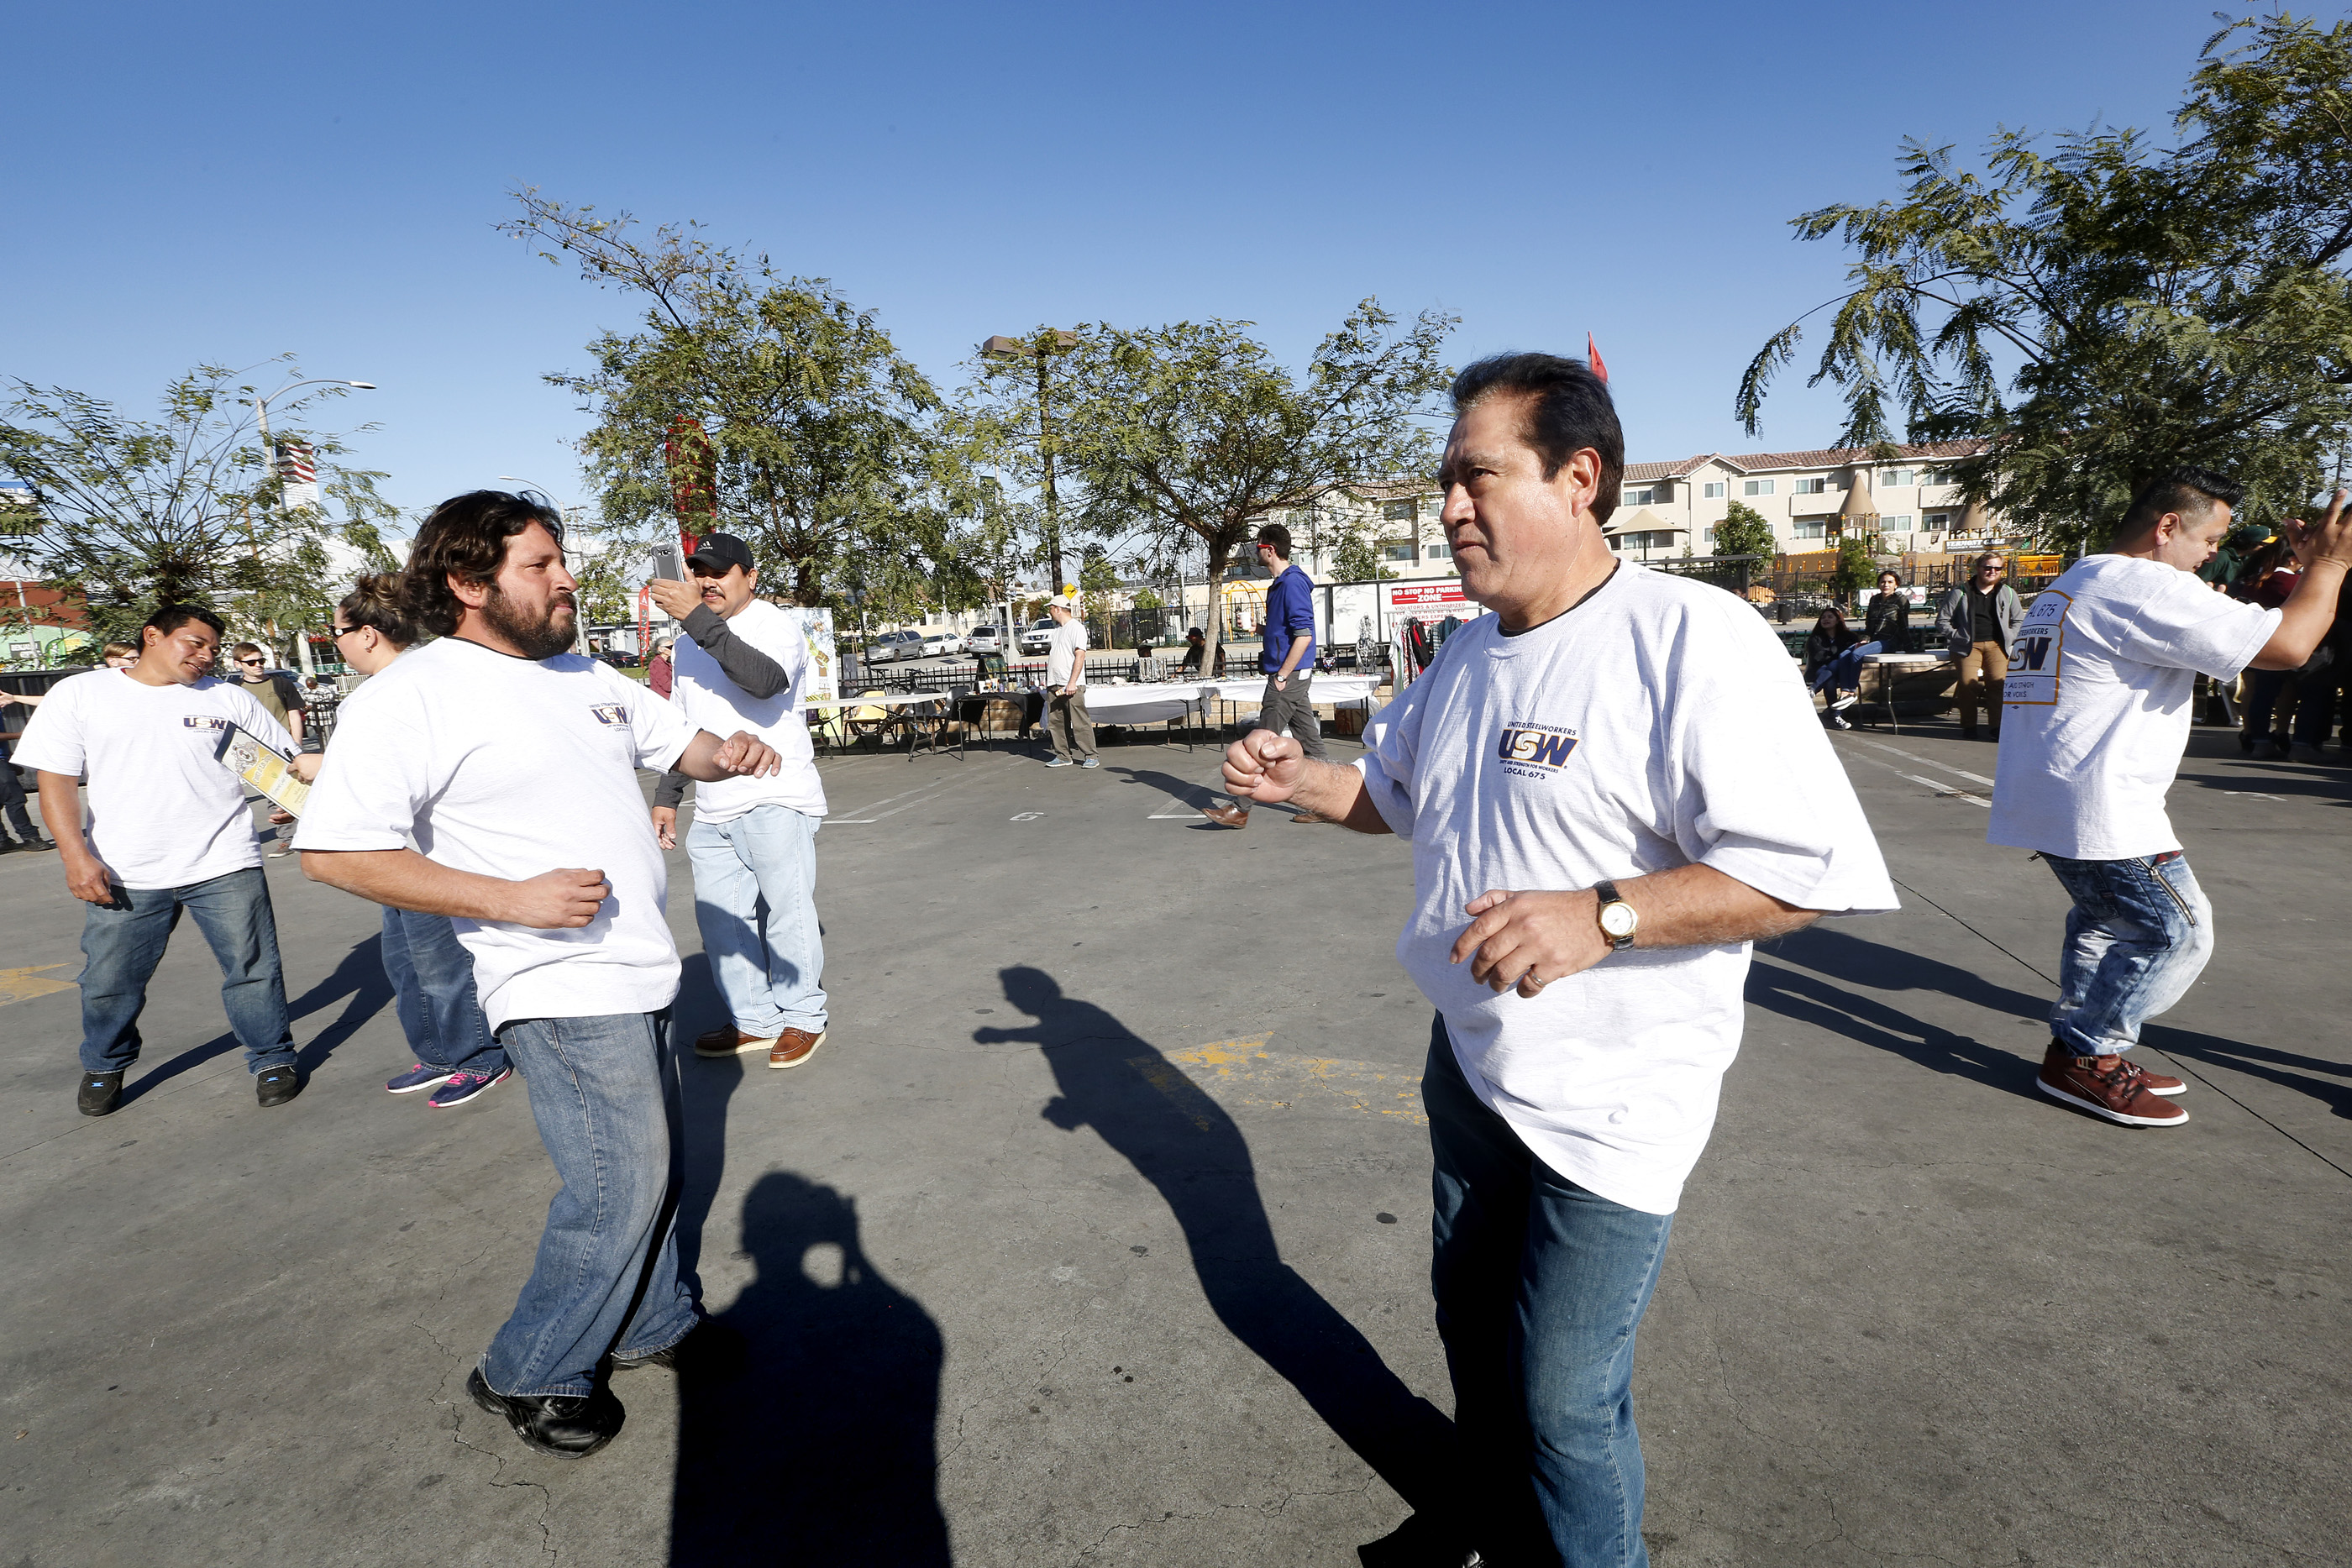 02/22/17 /LOS ANGELES/ Vermont Gage Carwash worker owners celebrate with the community their anniversary and their union contract. The celebration included music from Los Jornaleros del Norte, vendors, merchandise from other local cooperatives, to celebrate the hard working spirit of this unique group of car washeros. (Photo Aurelia Ventura/La Opinion)